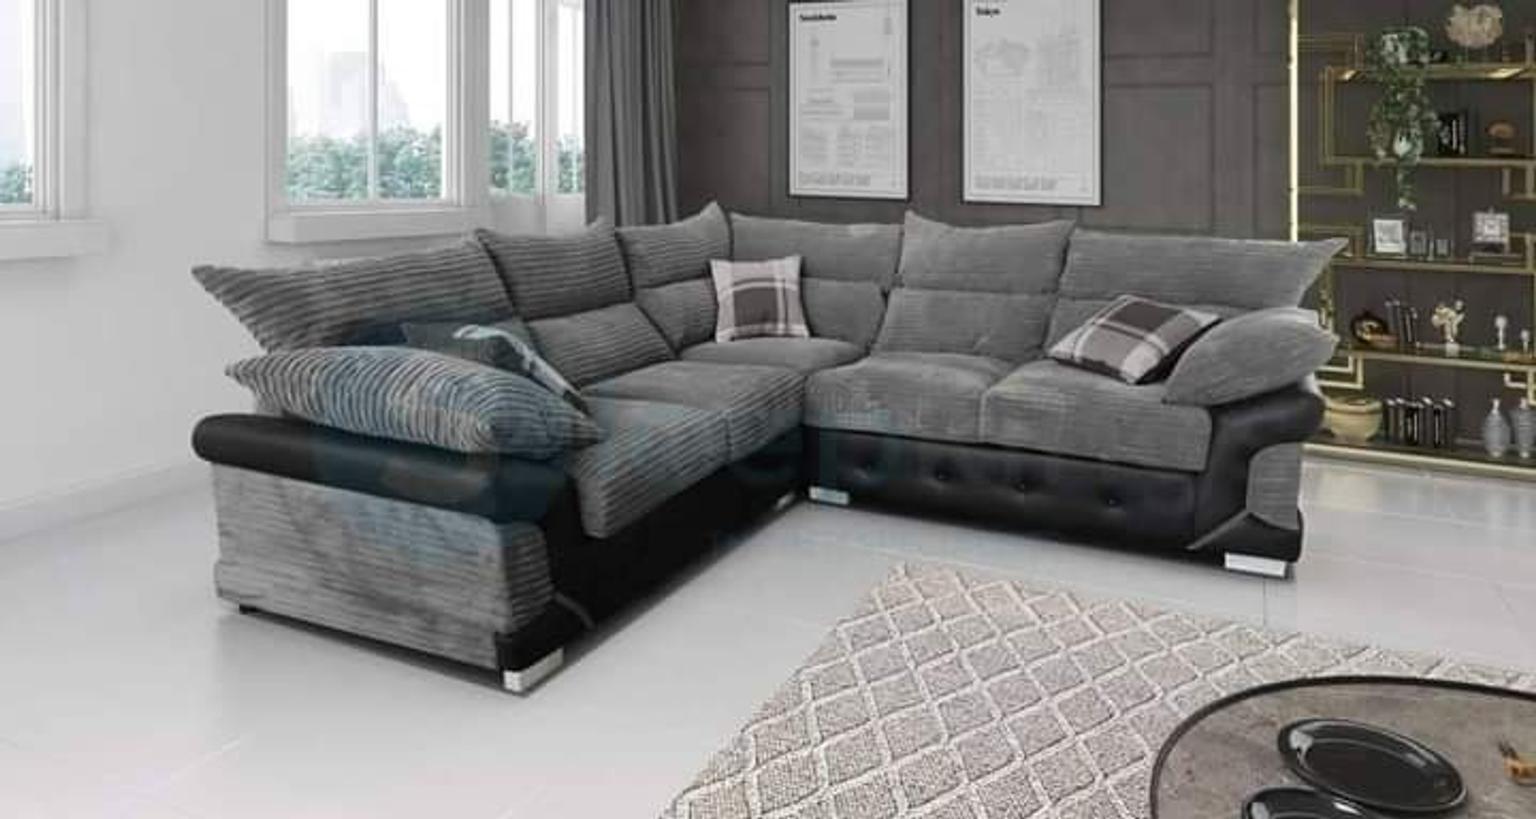 Brand New High Quality In B11, Sofa Quality By Brand